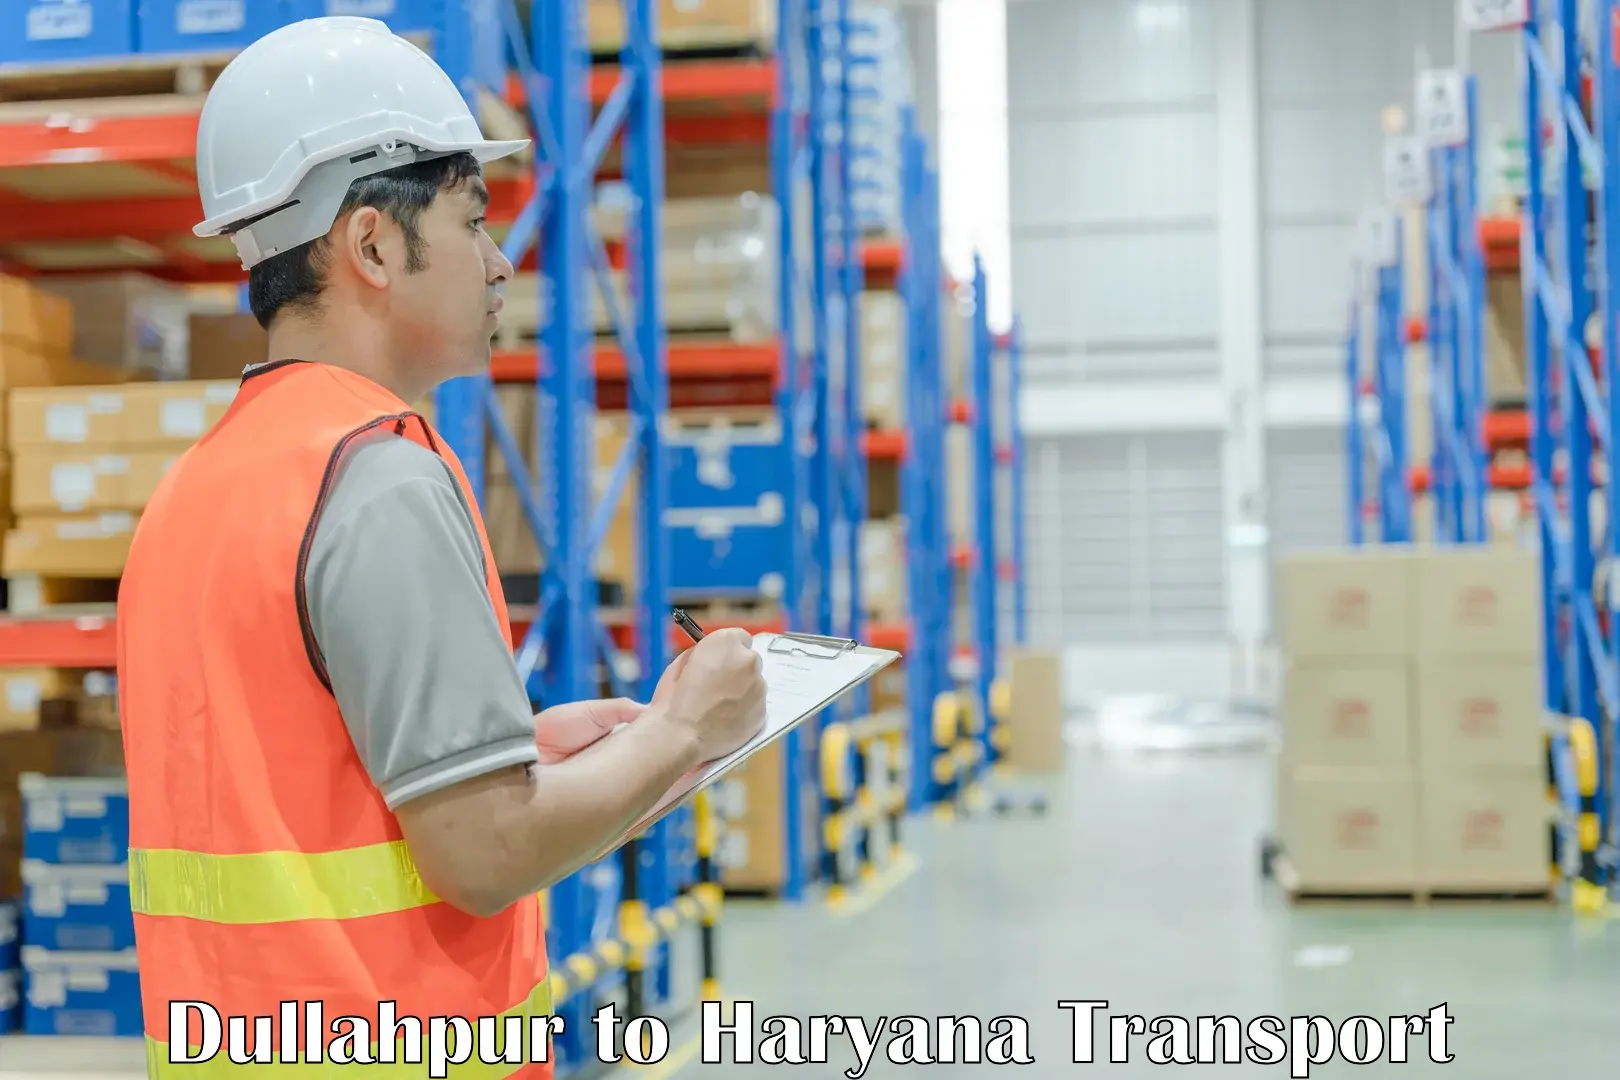 Shipping services Dullahpur to NCR Haryana